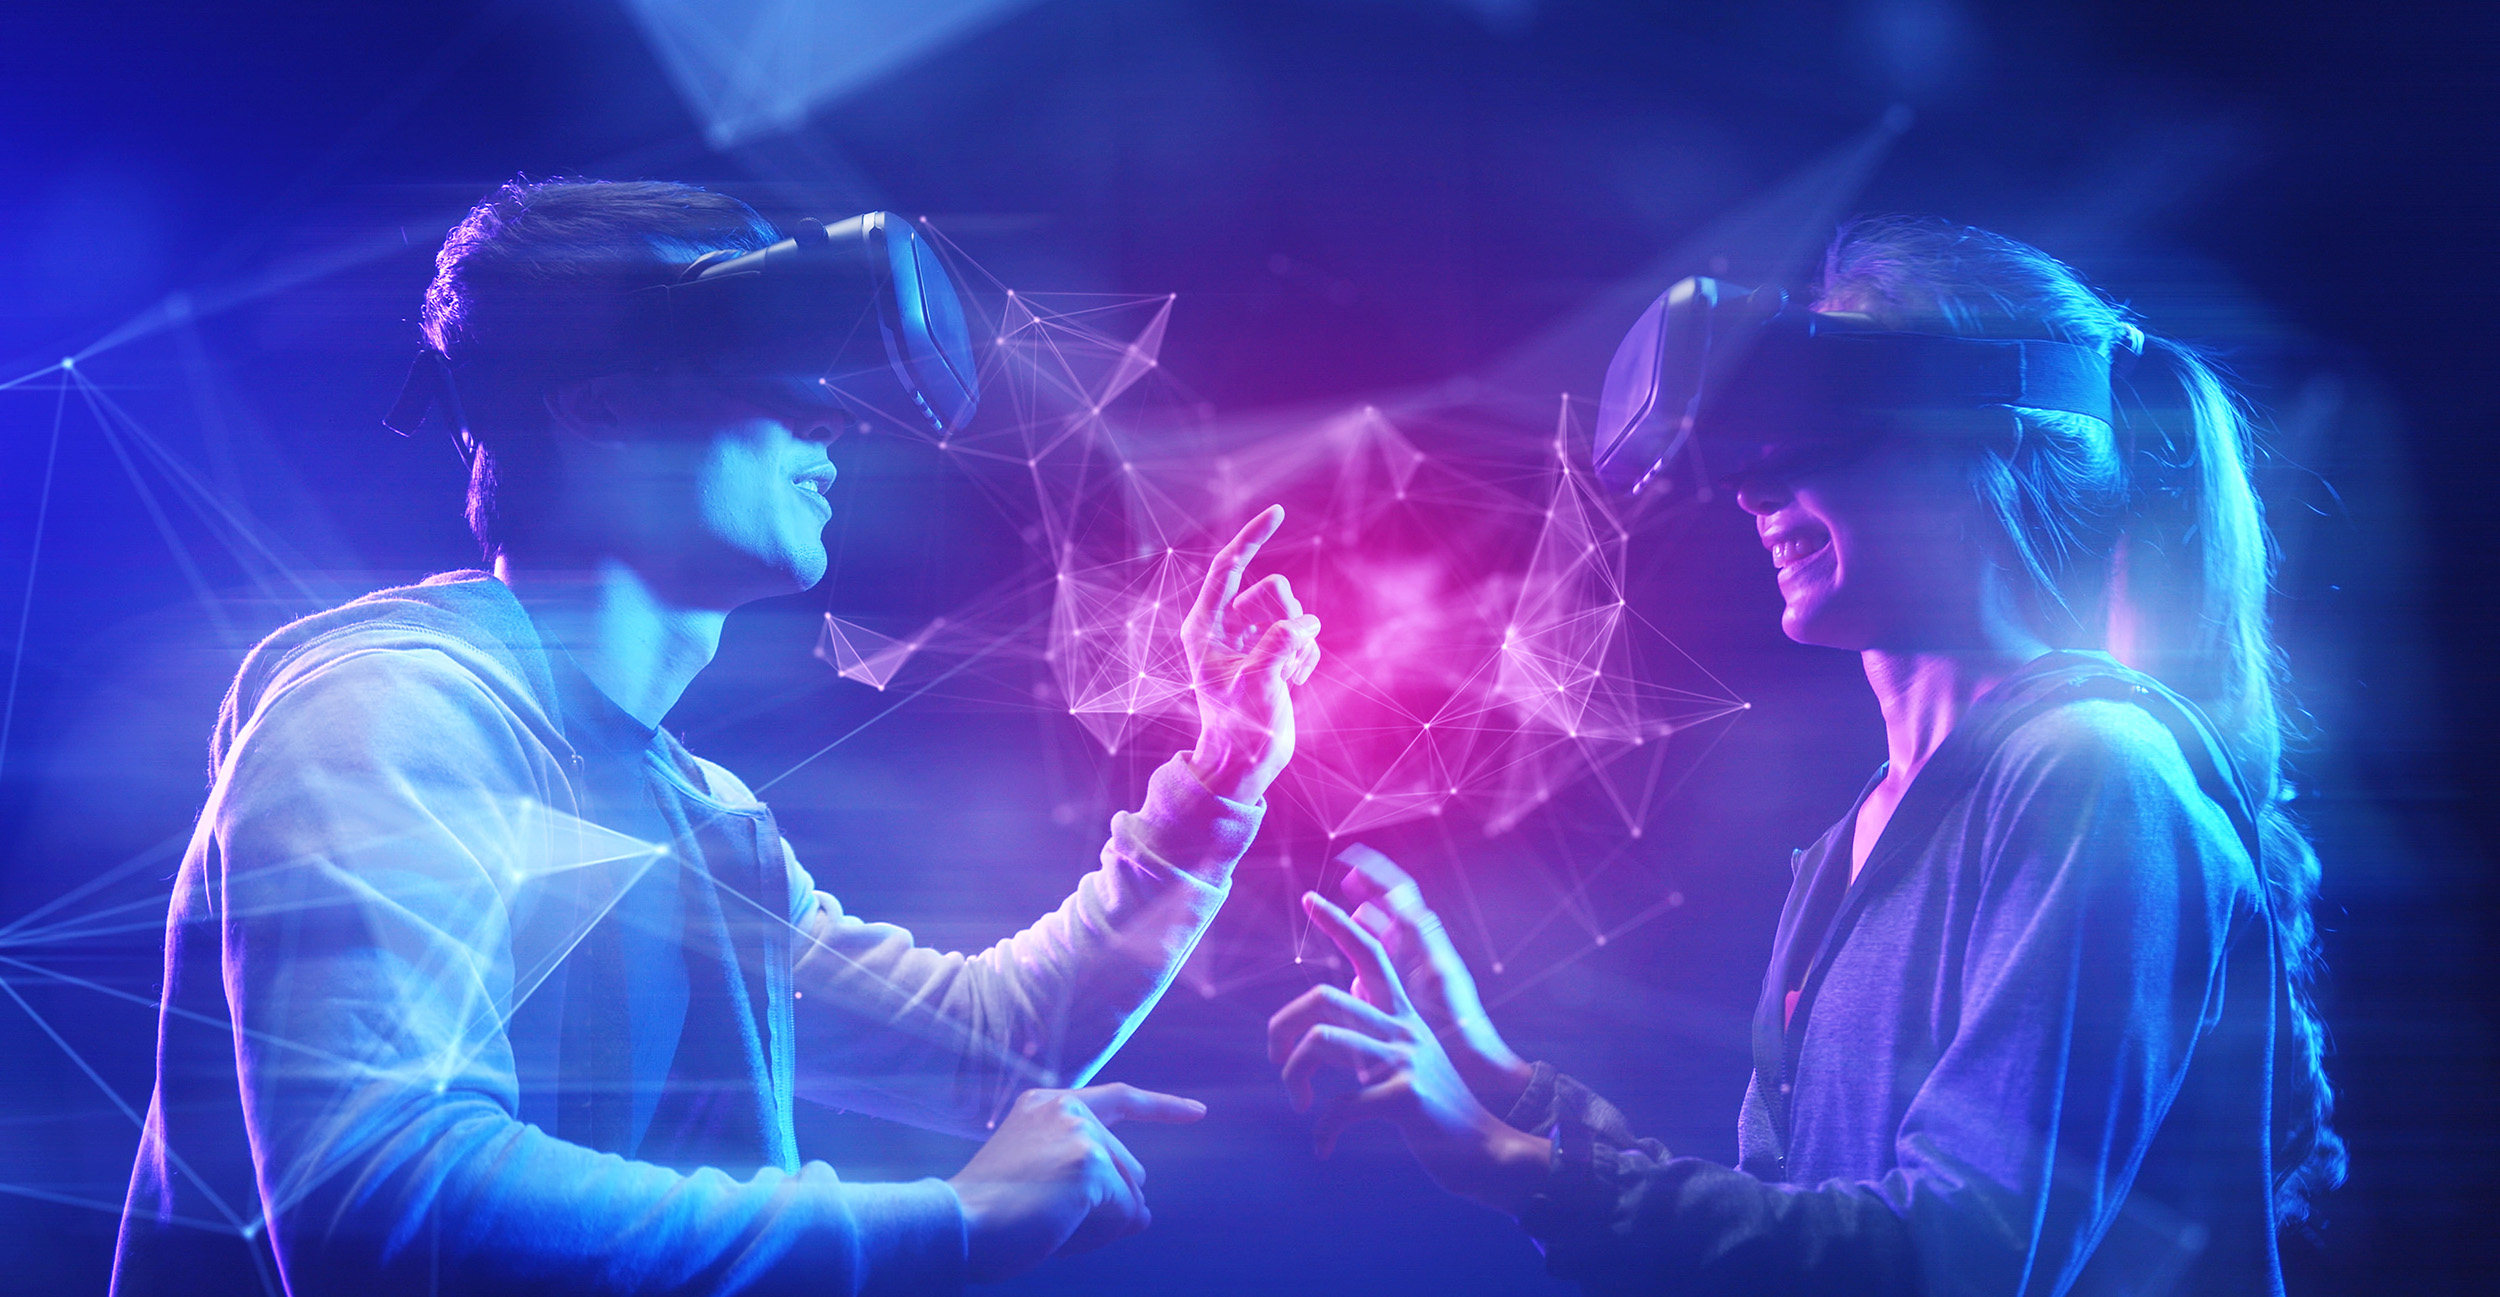 Establishing its new unit underlines Alibaba’s interest in the metaverse, a shared, immersive 3D virtual space. Photo: Shutterstock